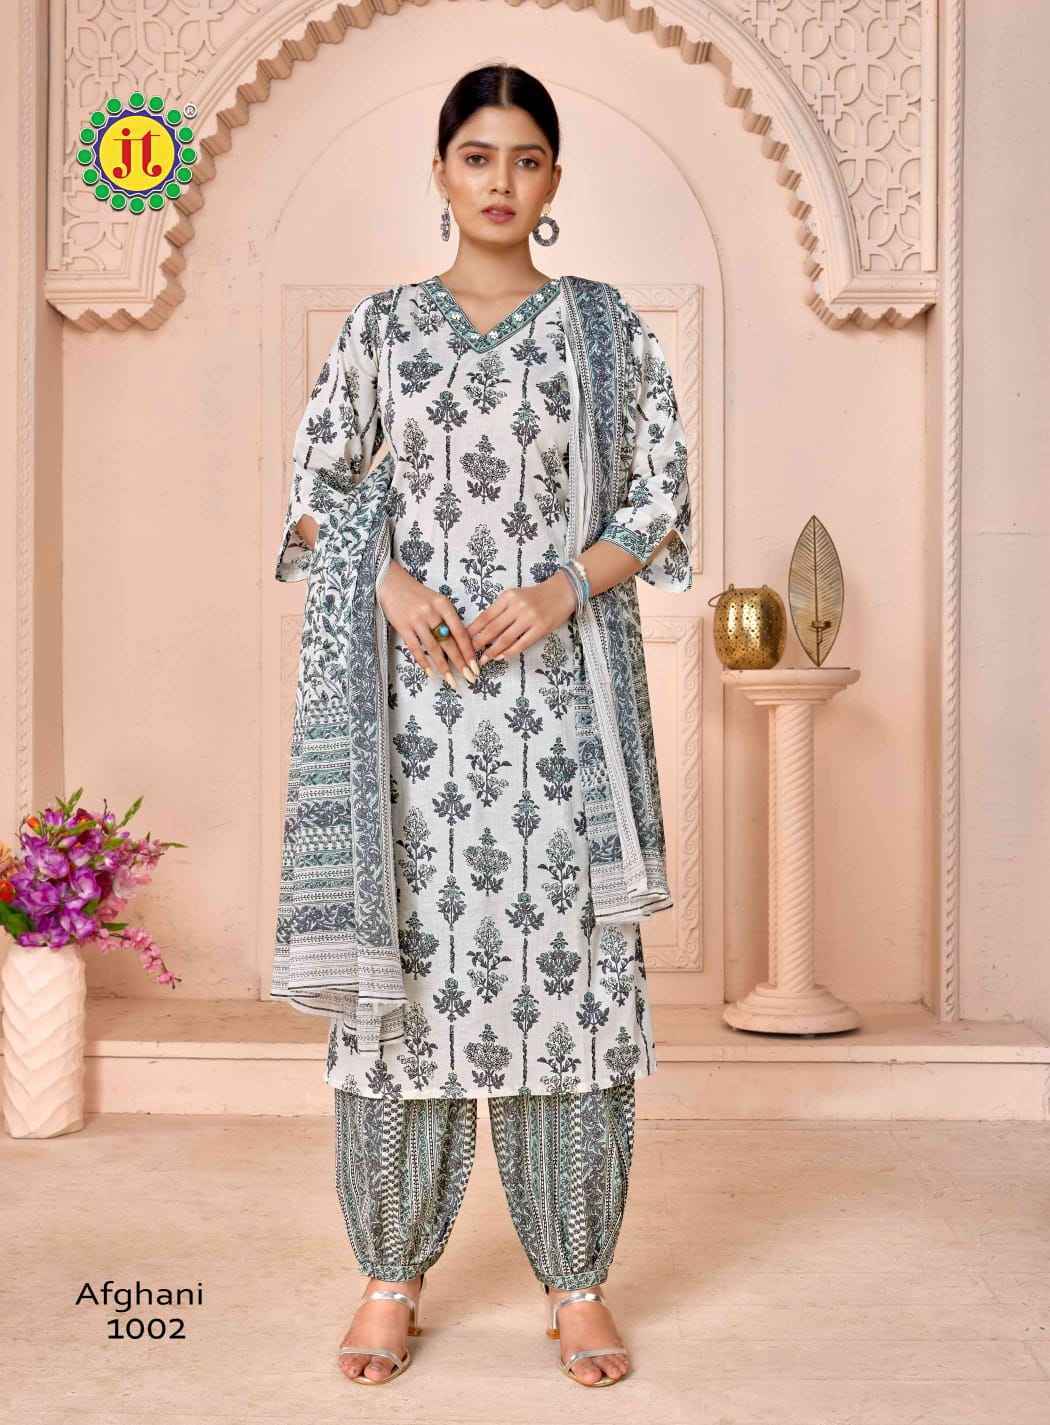 Designer Cotton 60*60 Floral Afghani Suit at Rs.815/Set in surat offer by  MURTI TRENDS